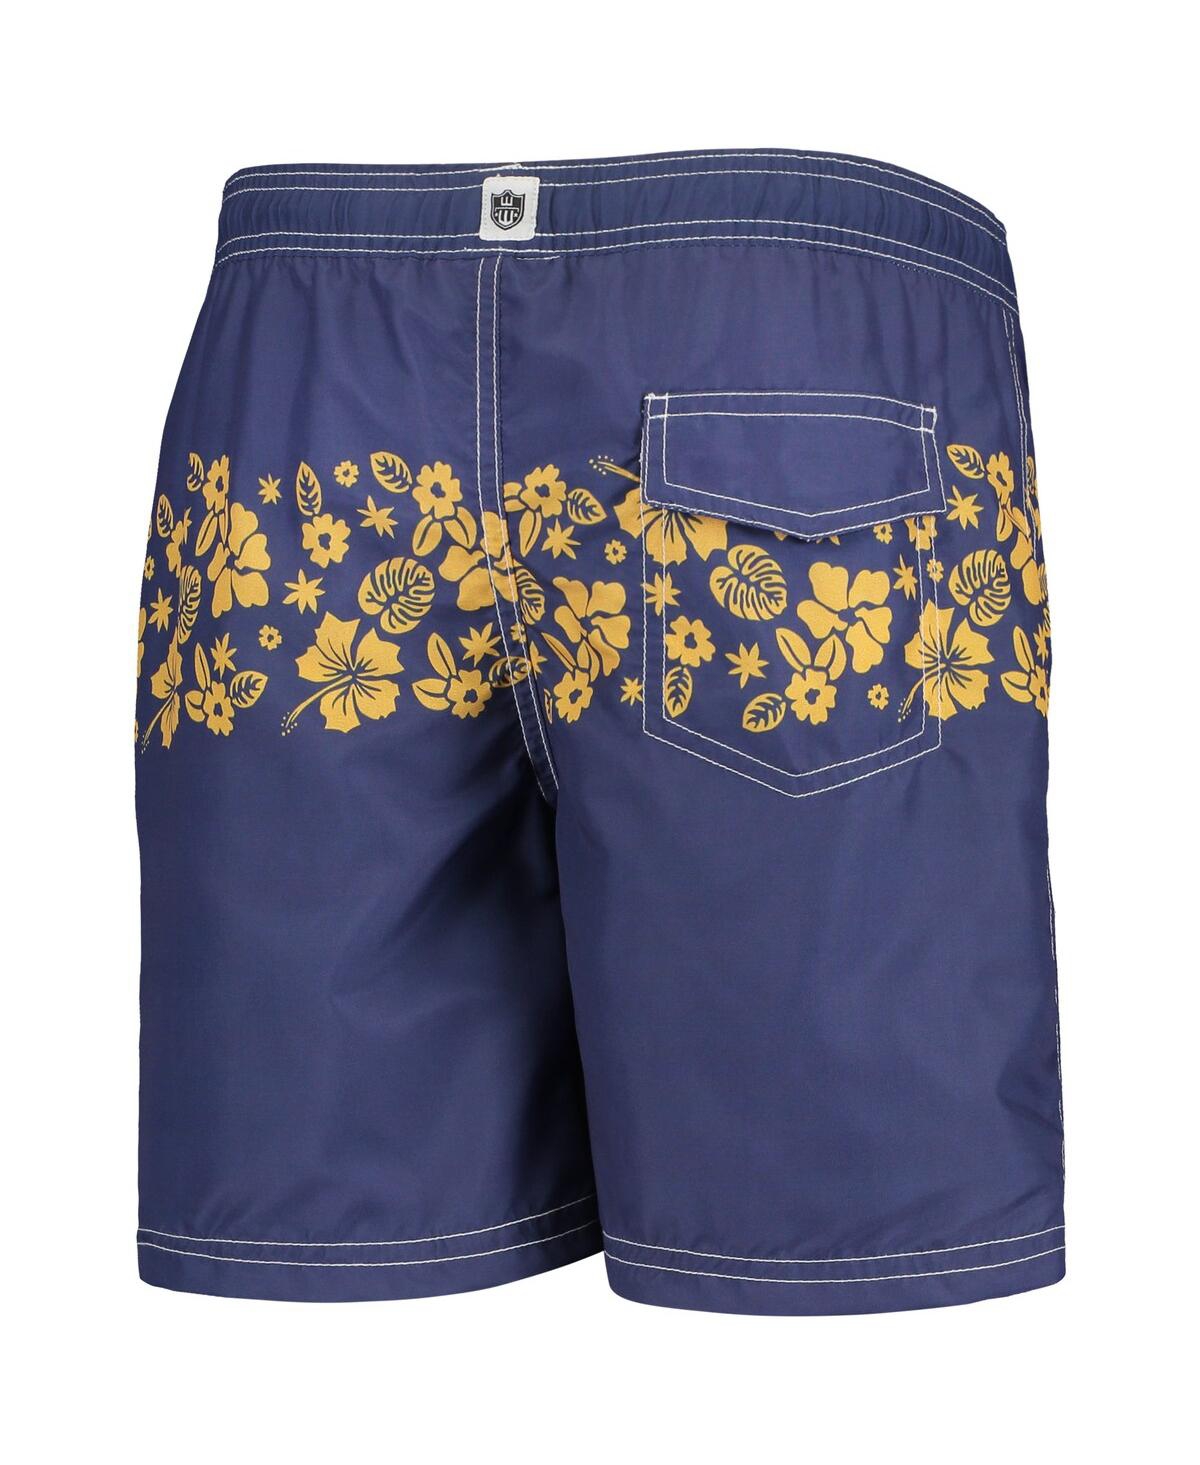 Shop Wes & Willy Big Boys  Navy Notre Dame Fighting Irish Inset Floral Swim Trunk